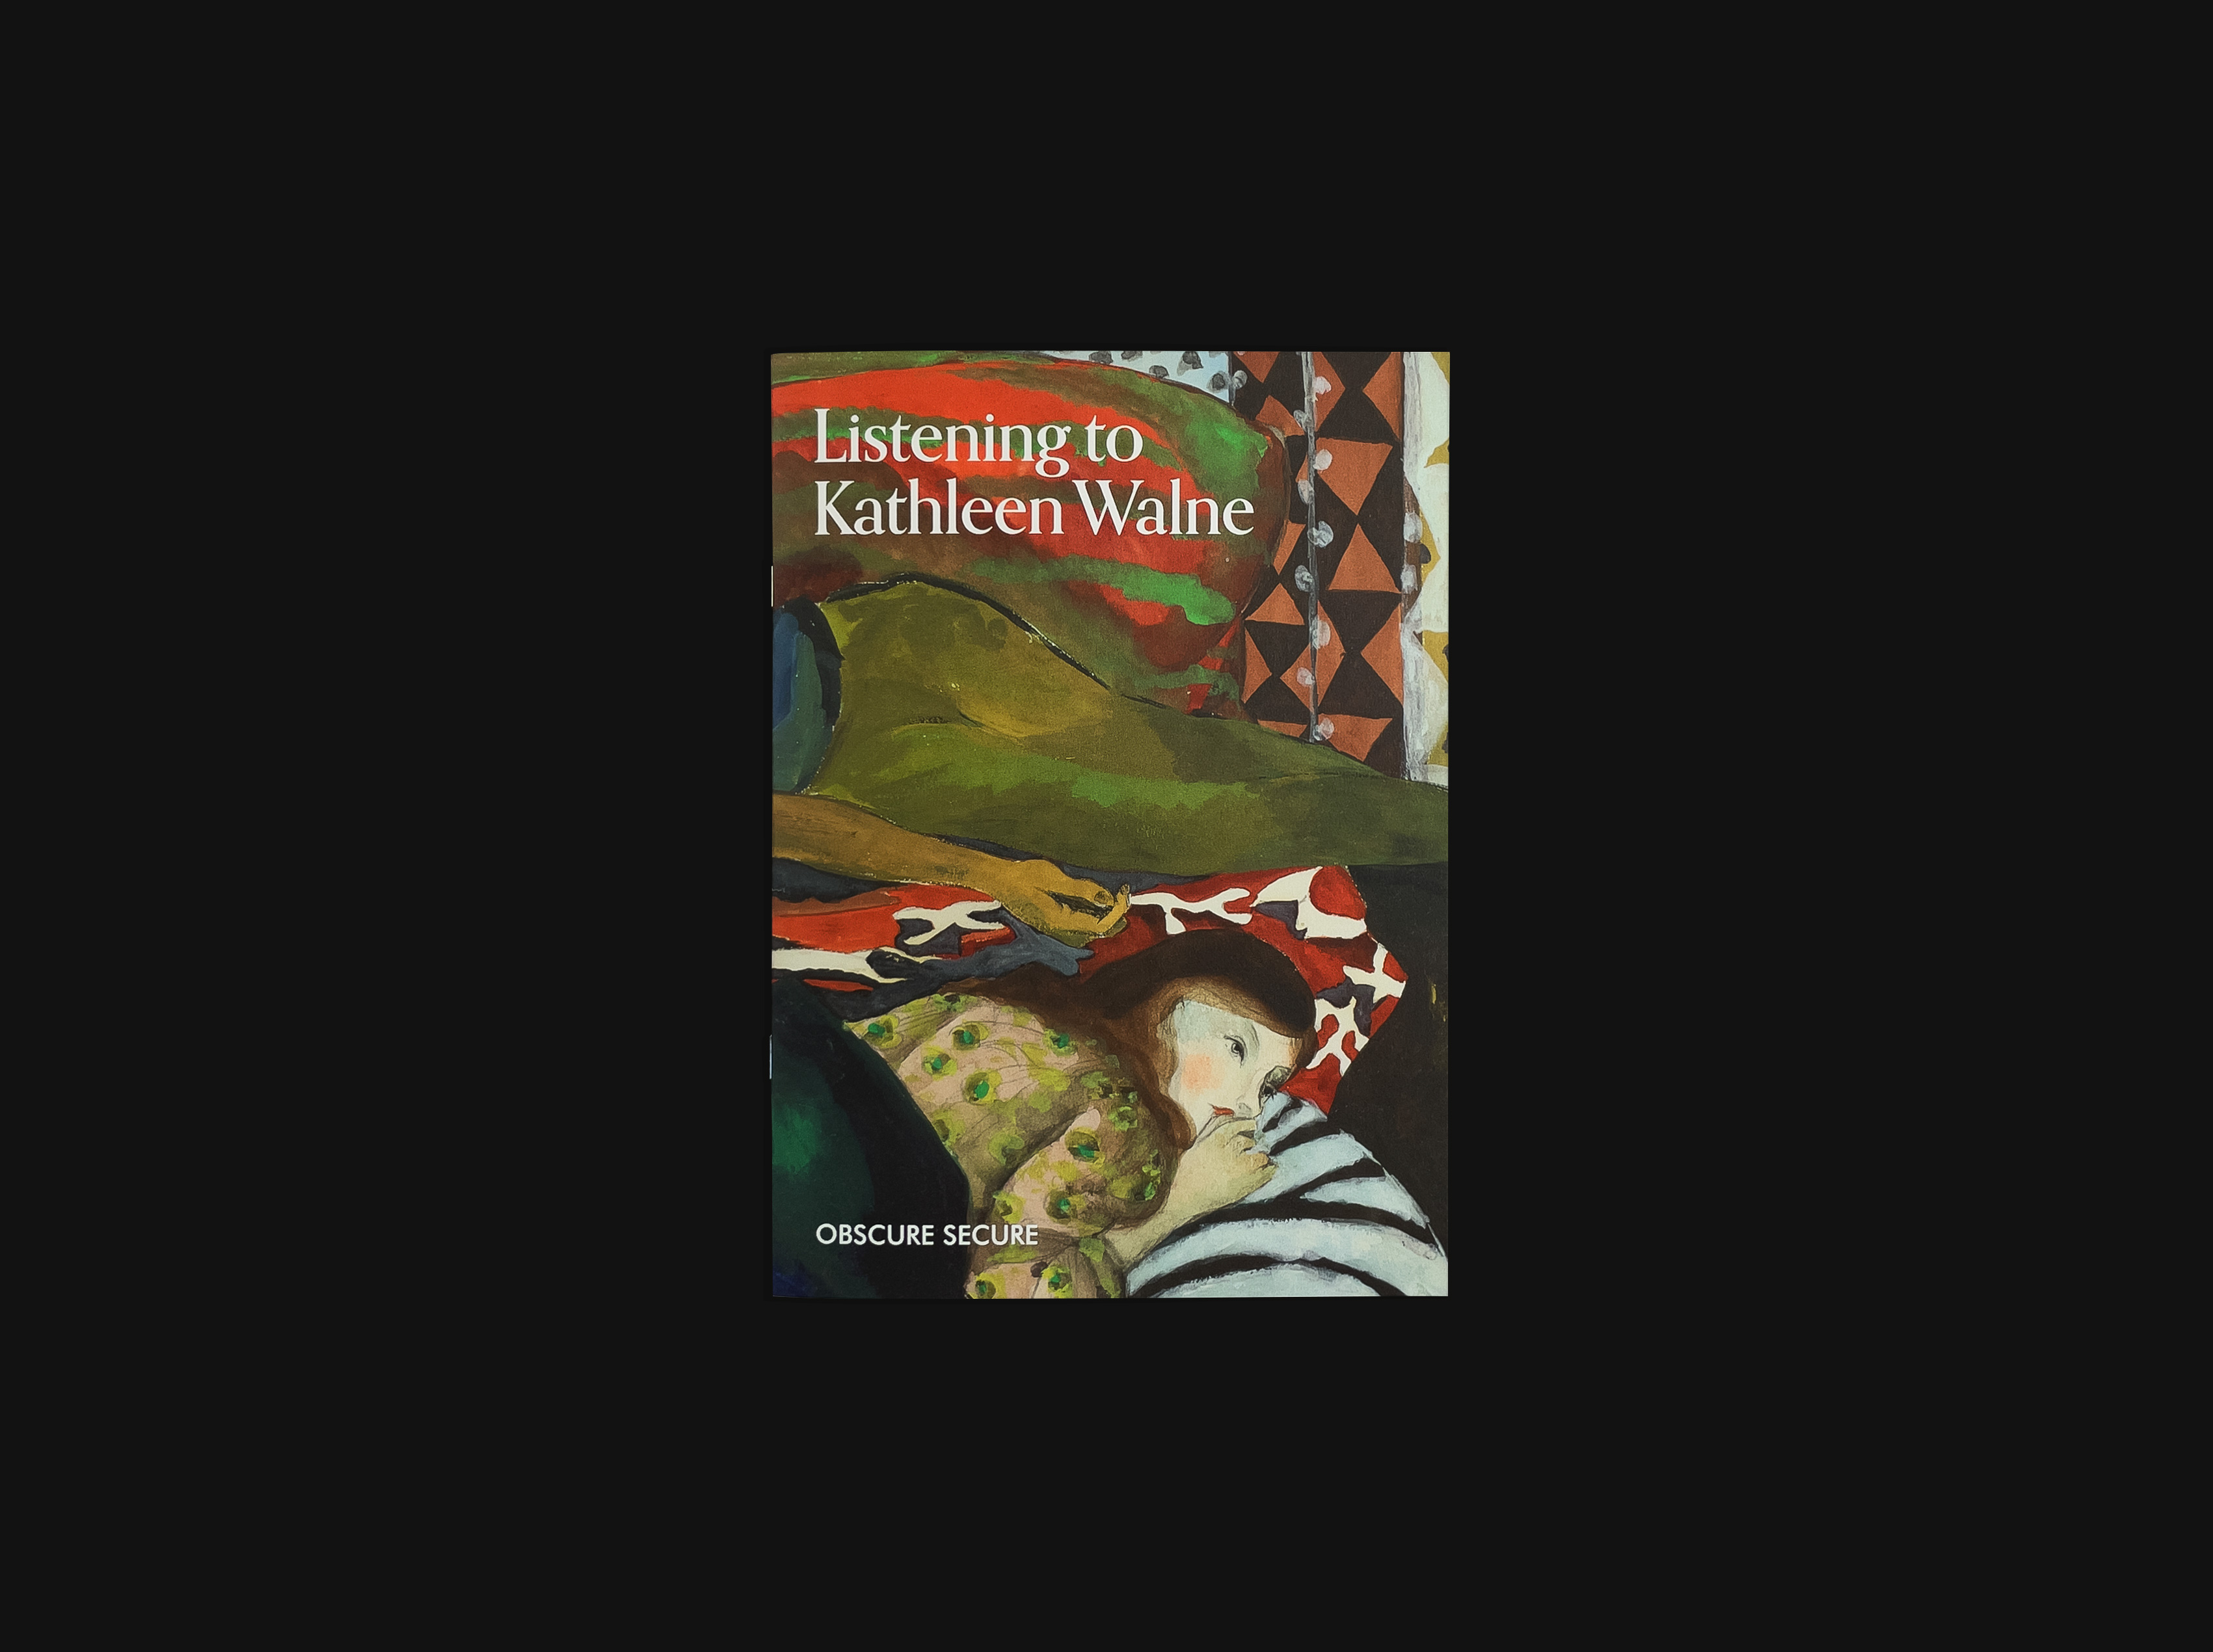 Book cover including a painting by Kathleen Walne and text